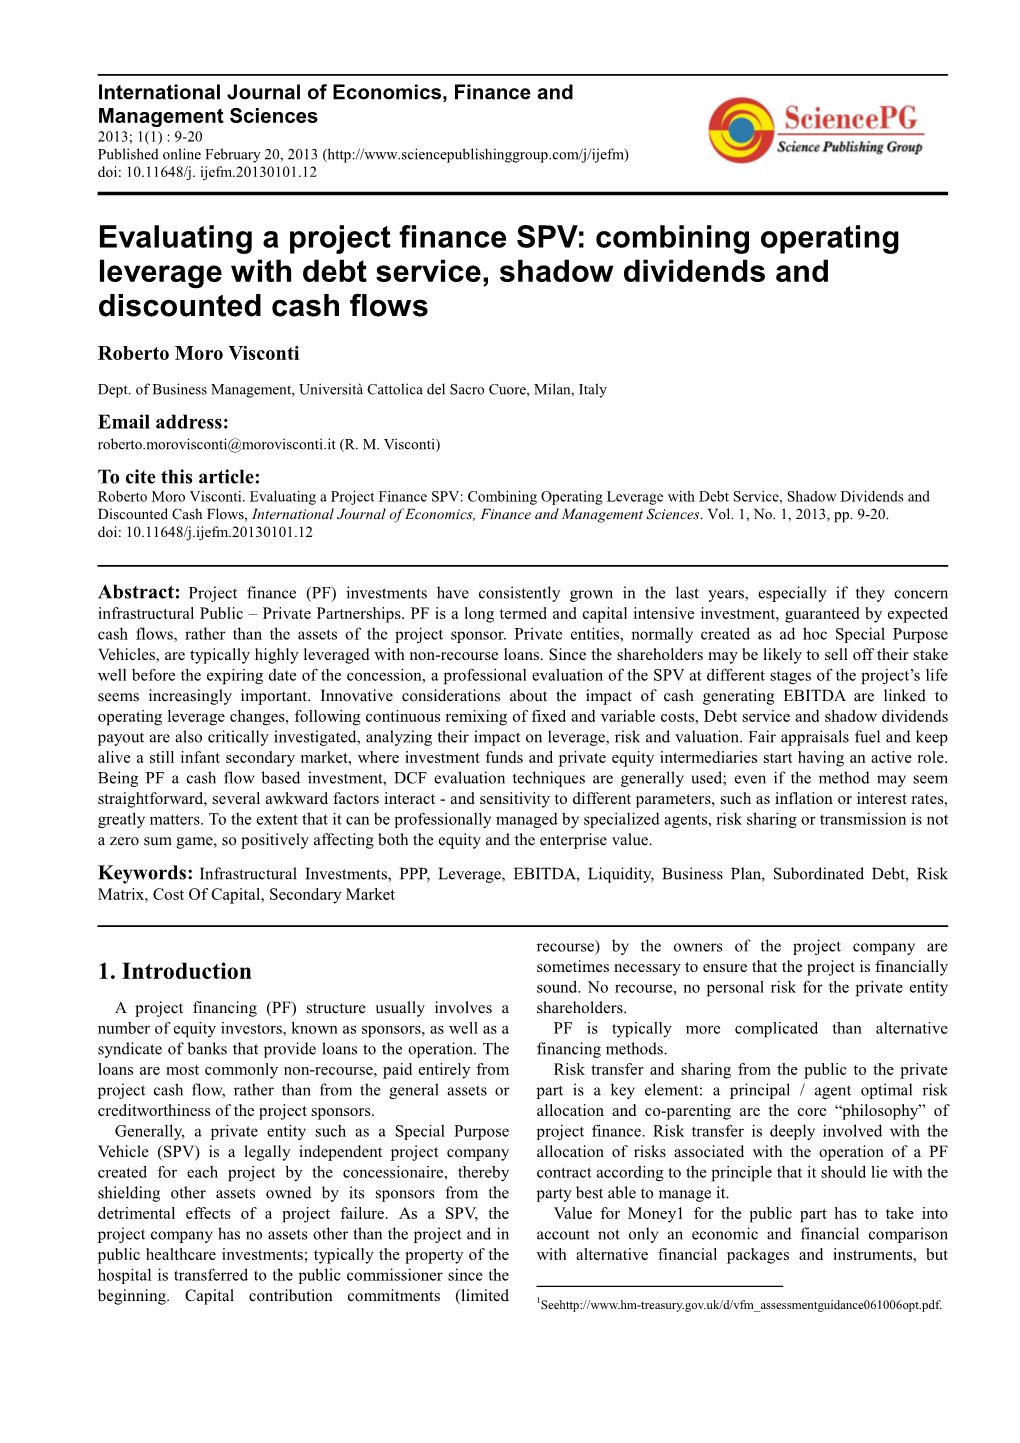 Evaluating a Project Finance SPV: Combining Operating Leverage with Debt Service, Shadow Dividends and Discounted Cash Flows